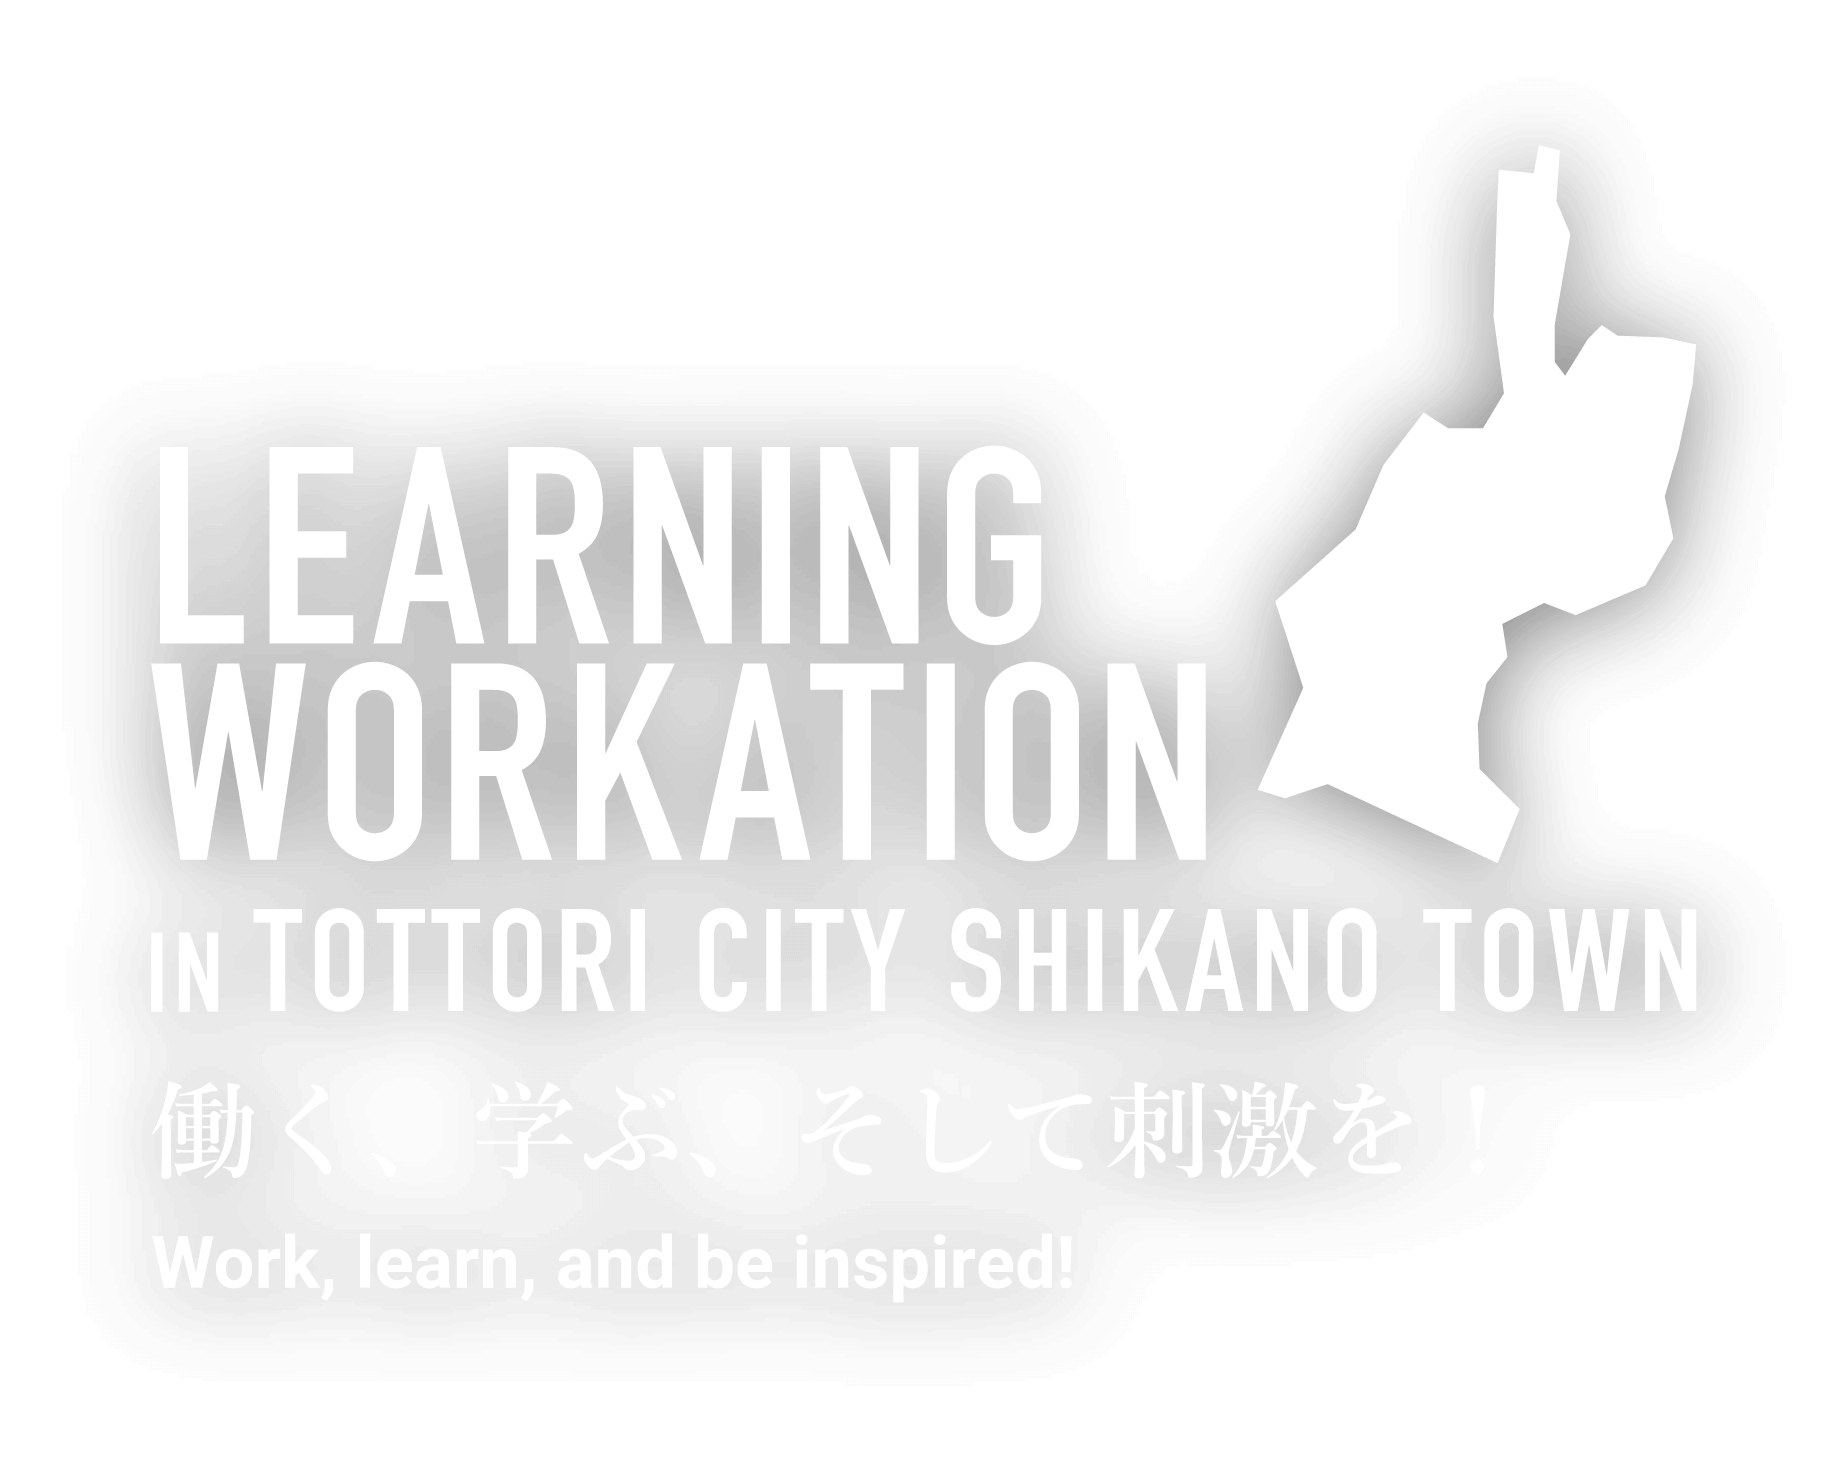 LEARNING WORKATION IN TOTTORI CITY SHIKANO TOWN 働く、学ぶ、そして刺激を! Work,learn,and be inspired!